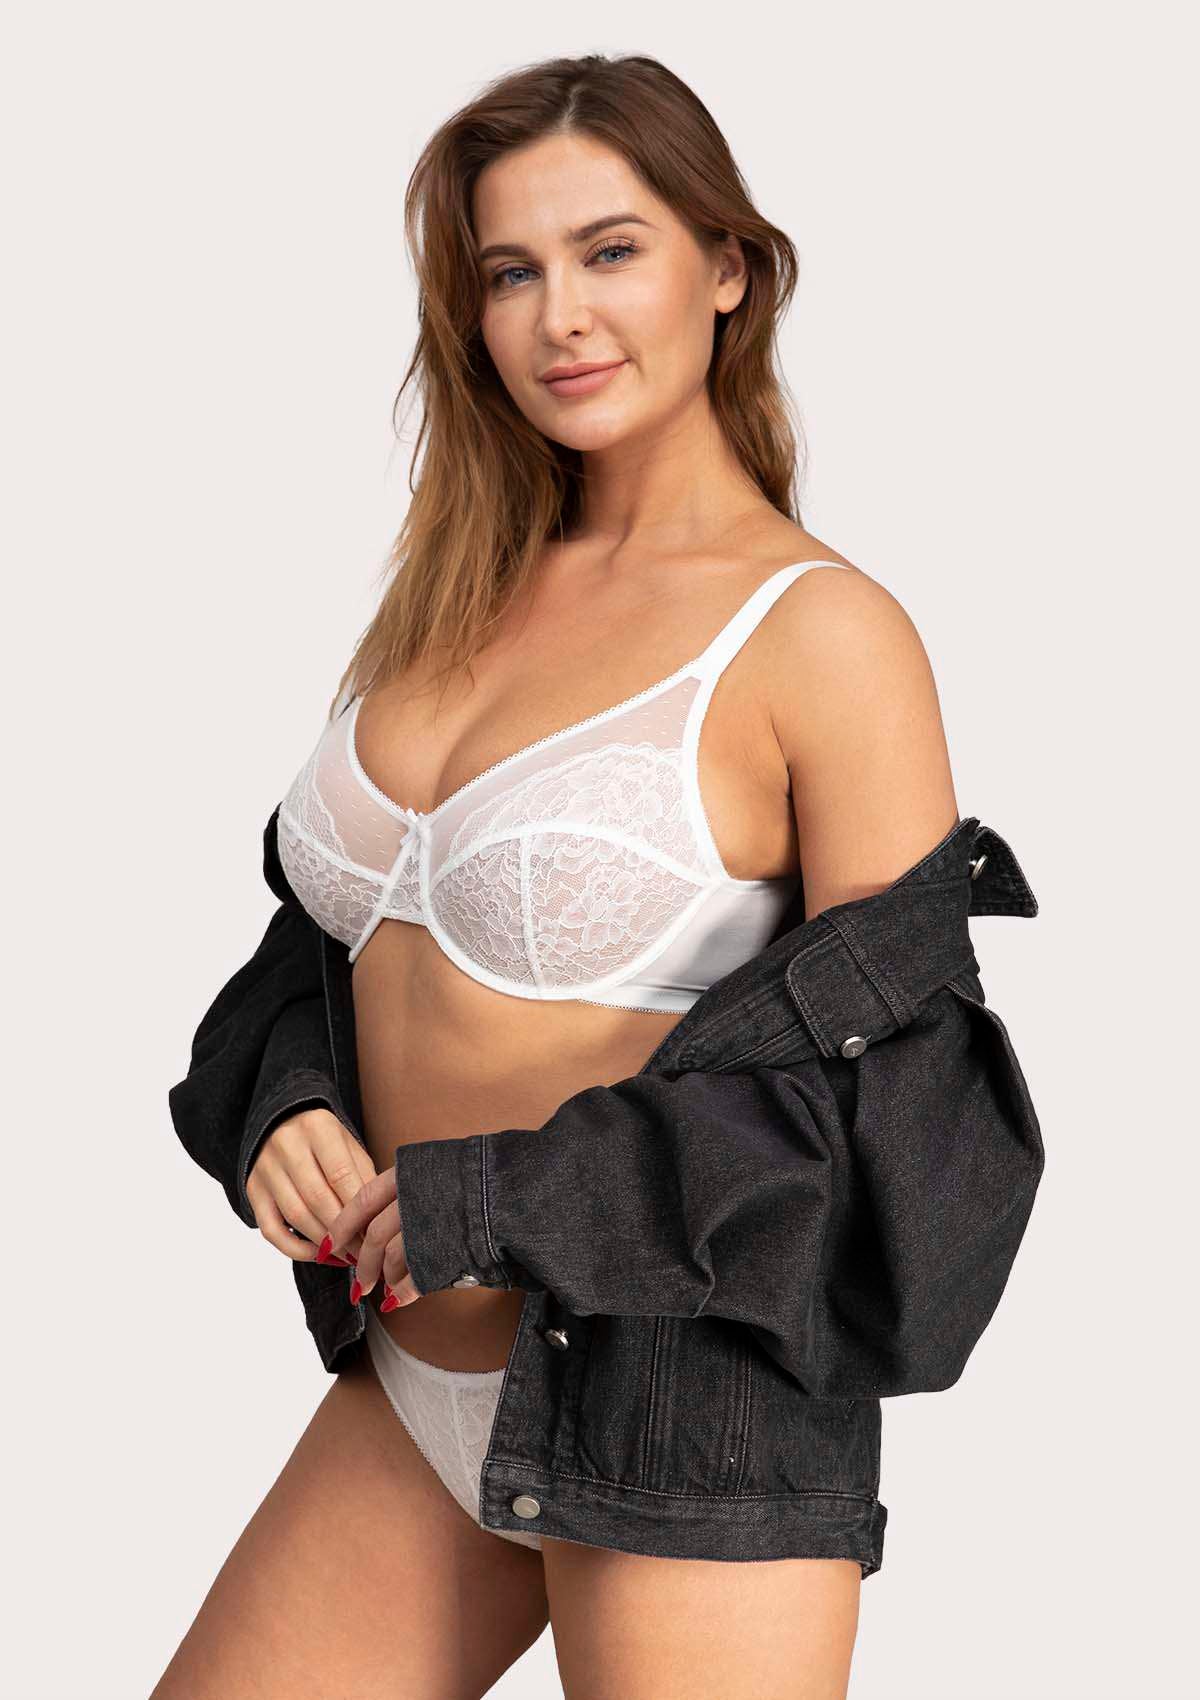 HSIA Enchante Lace Bra And Panties Set: Bra For Side And Back Fat - White / 38 / C